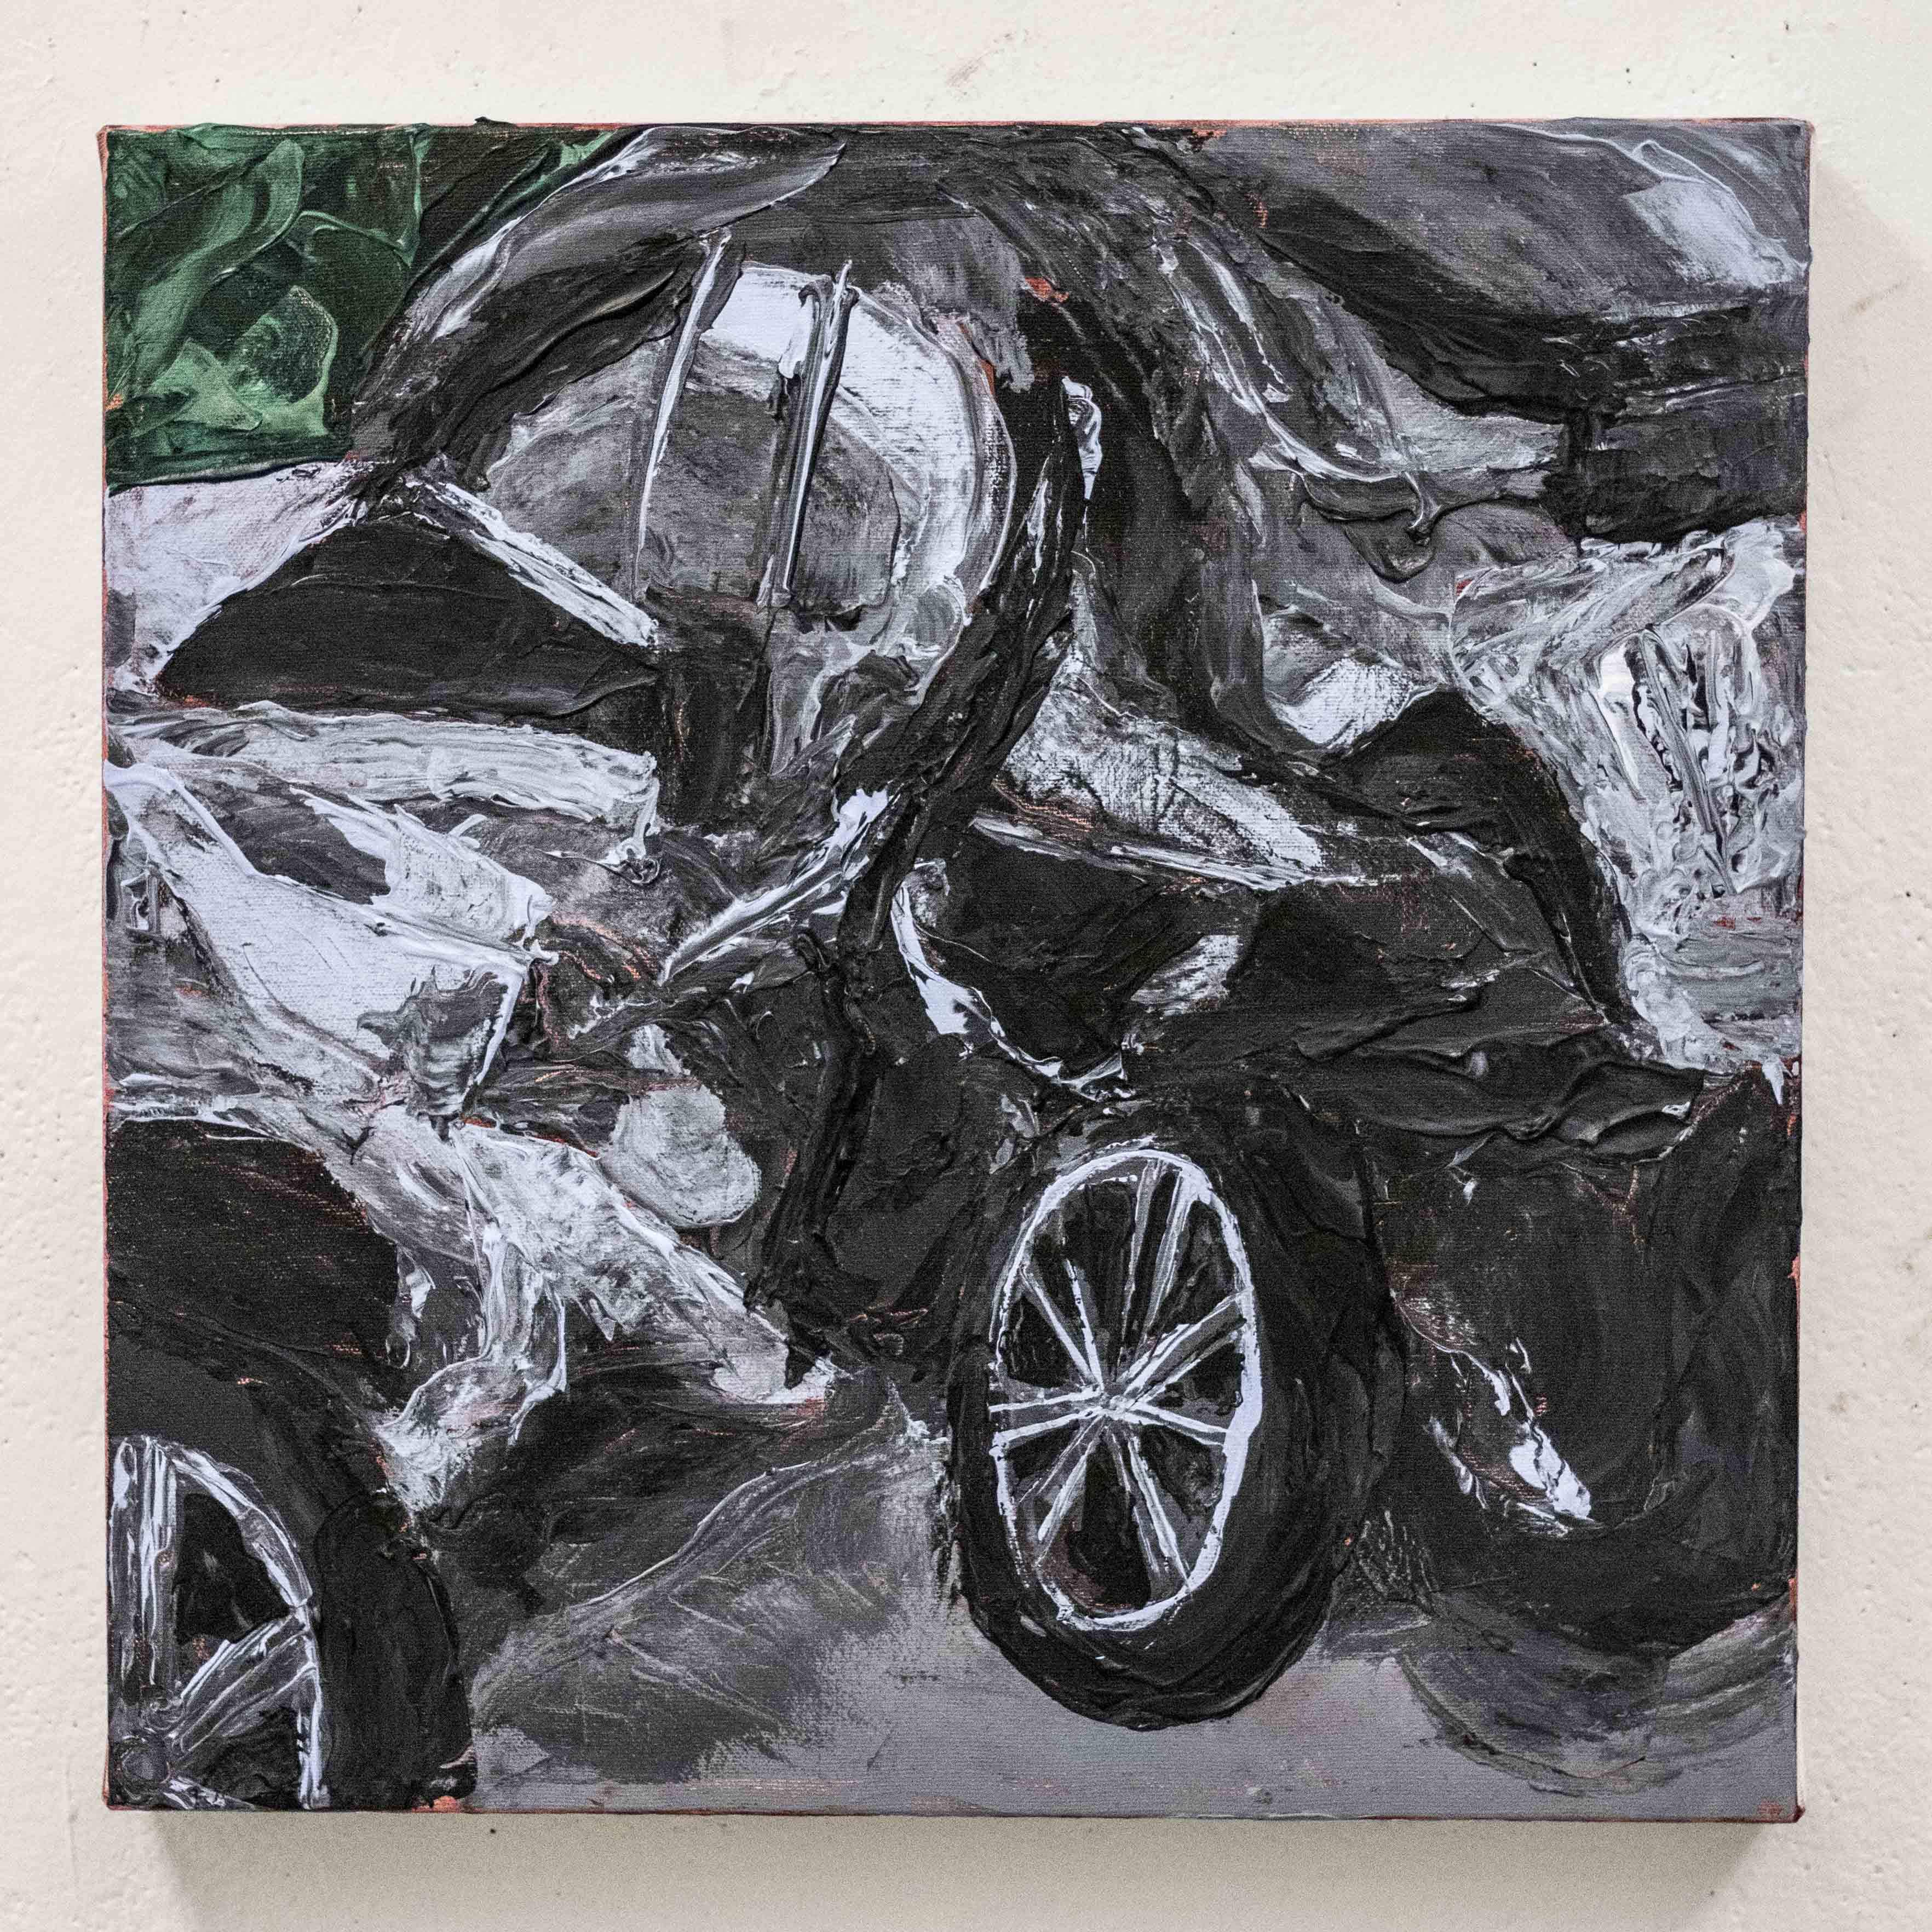 Painting of crashed cars, painted in whites and blacks with a patch of green at top left.